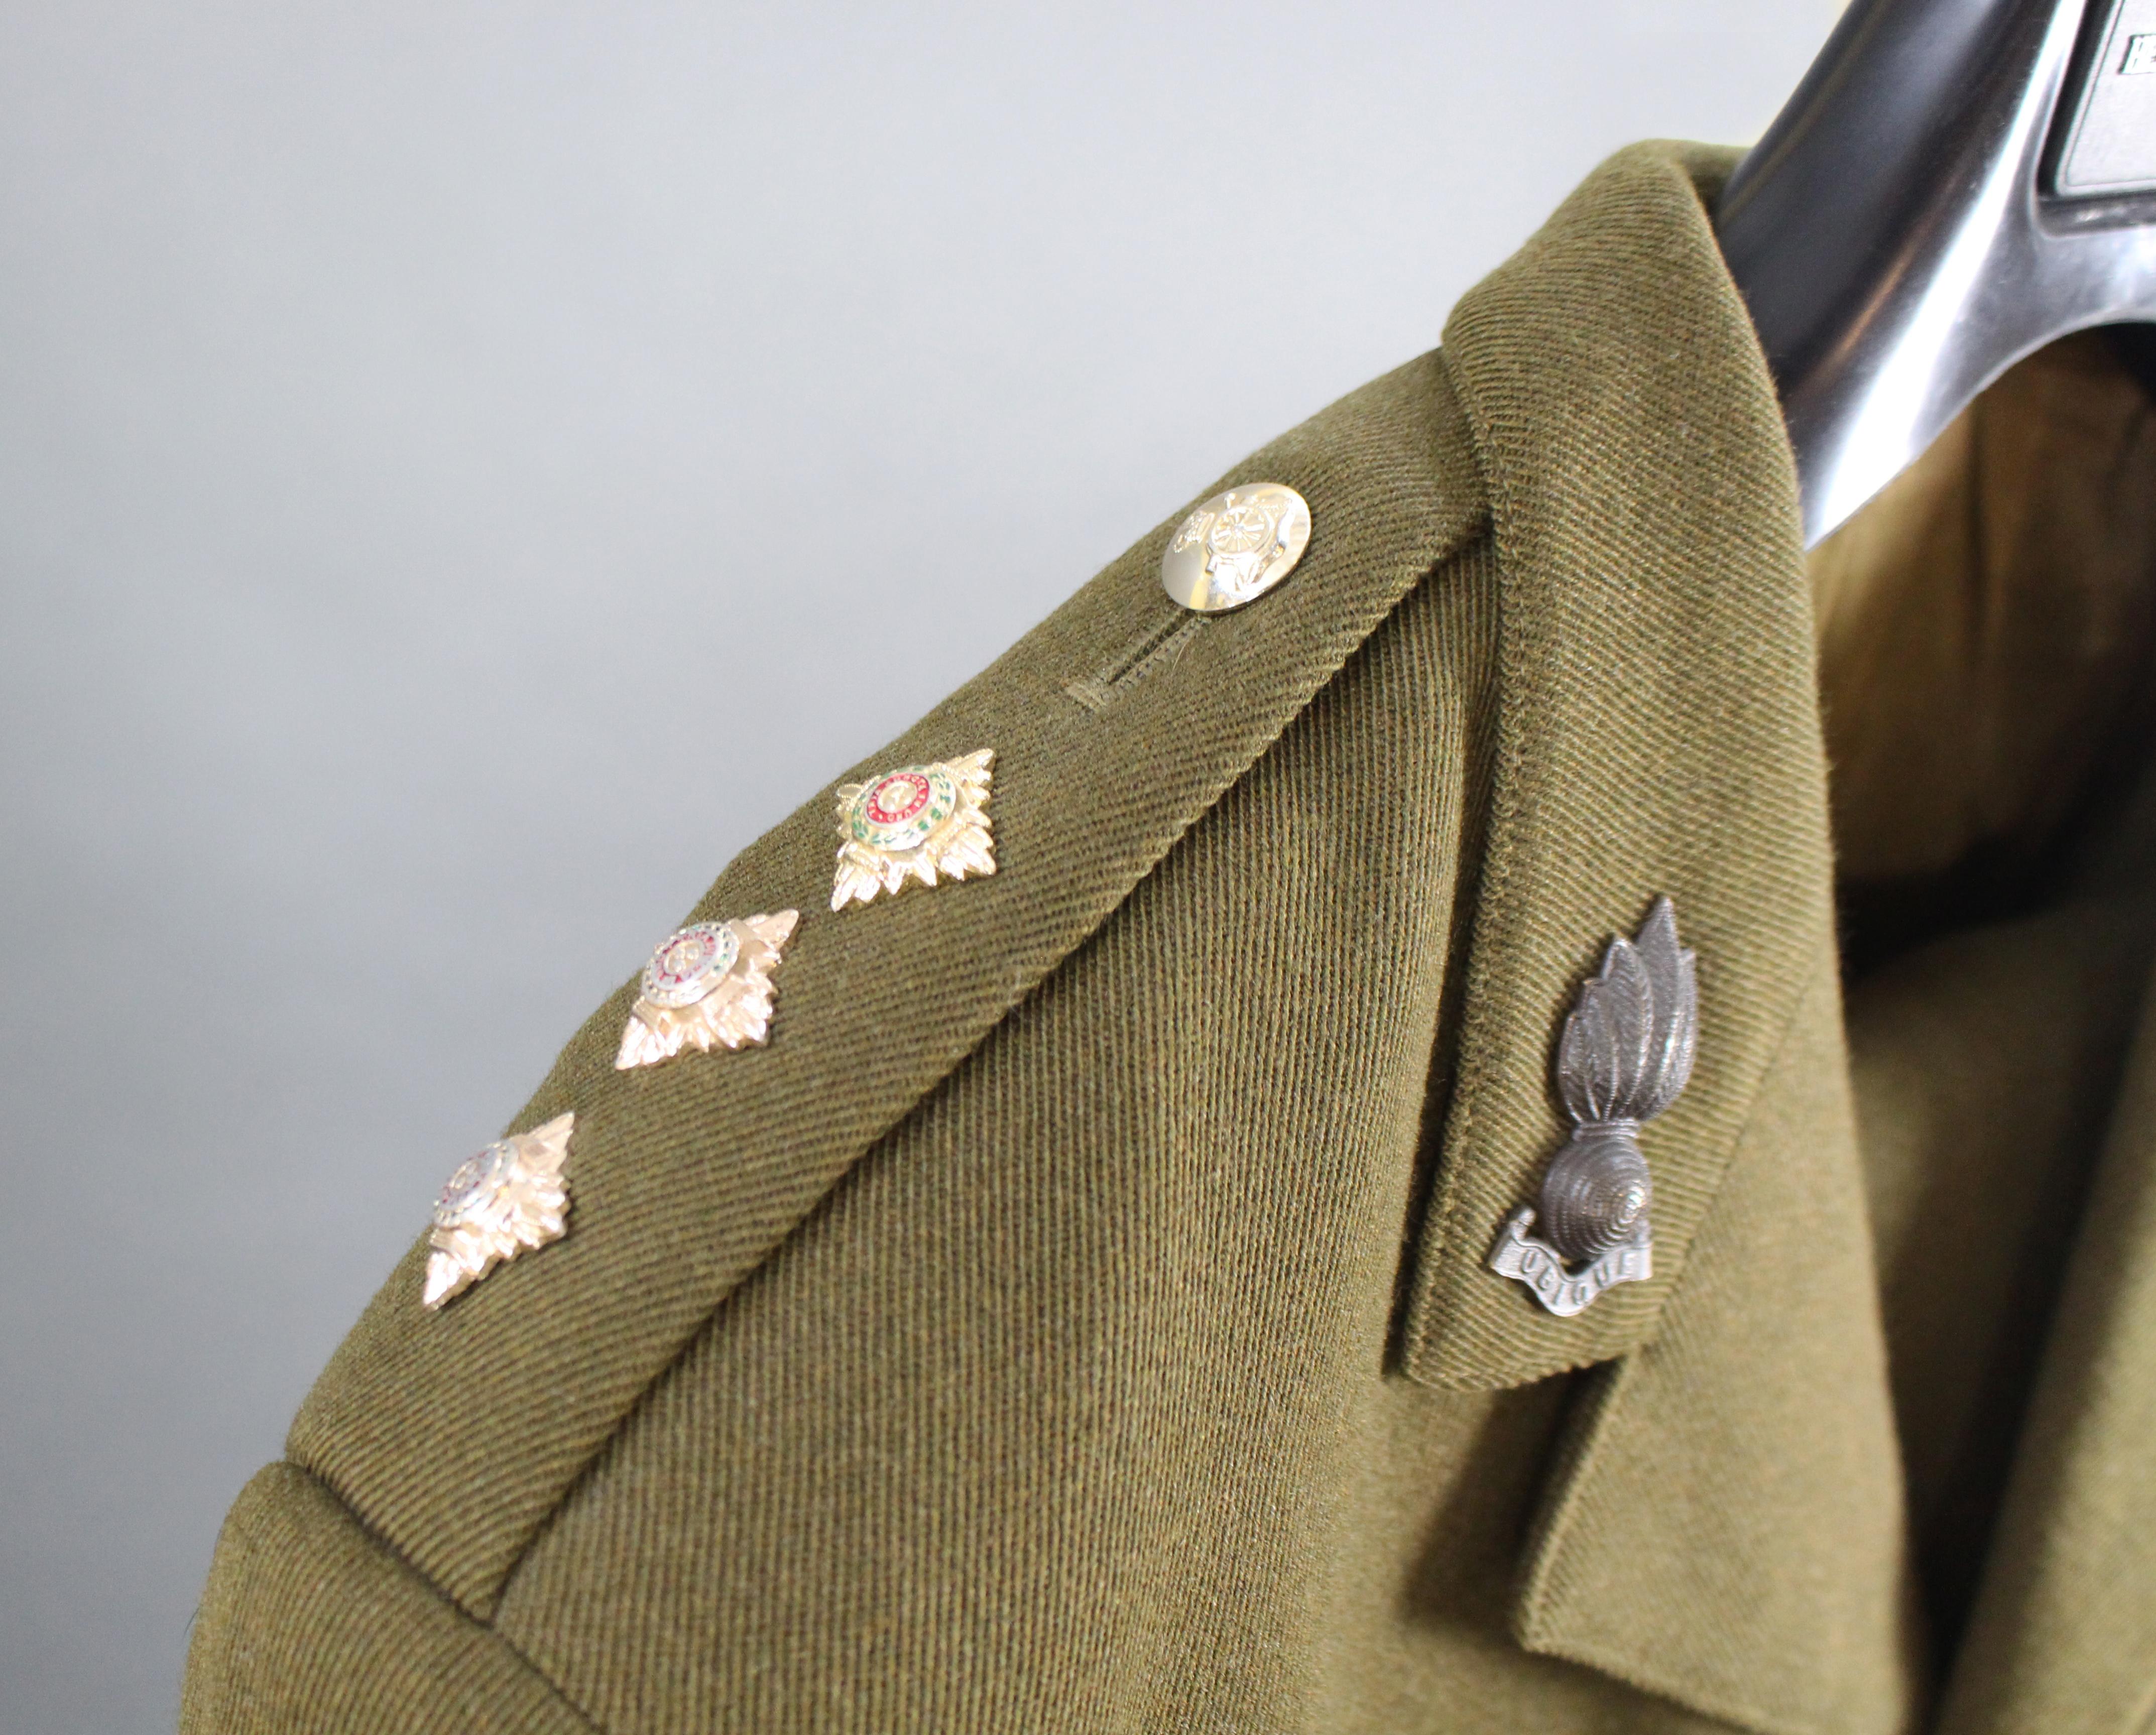 Vintage Gieves & Hawkes Army Artillery Captains Uniform In Good Condition For Sale In Worcester, Worcestershire